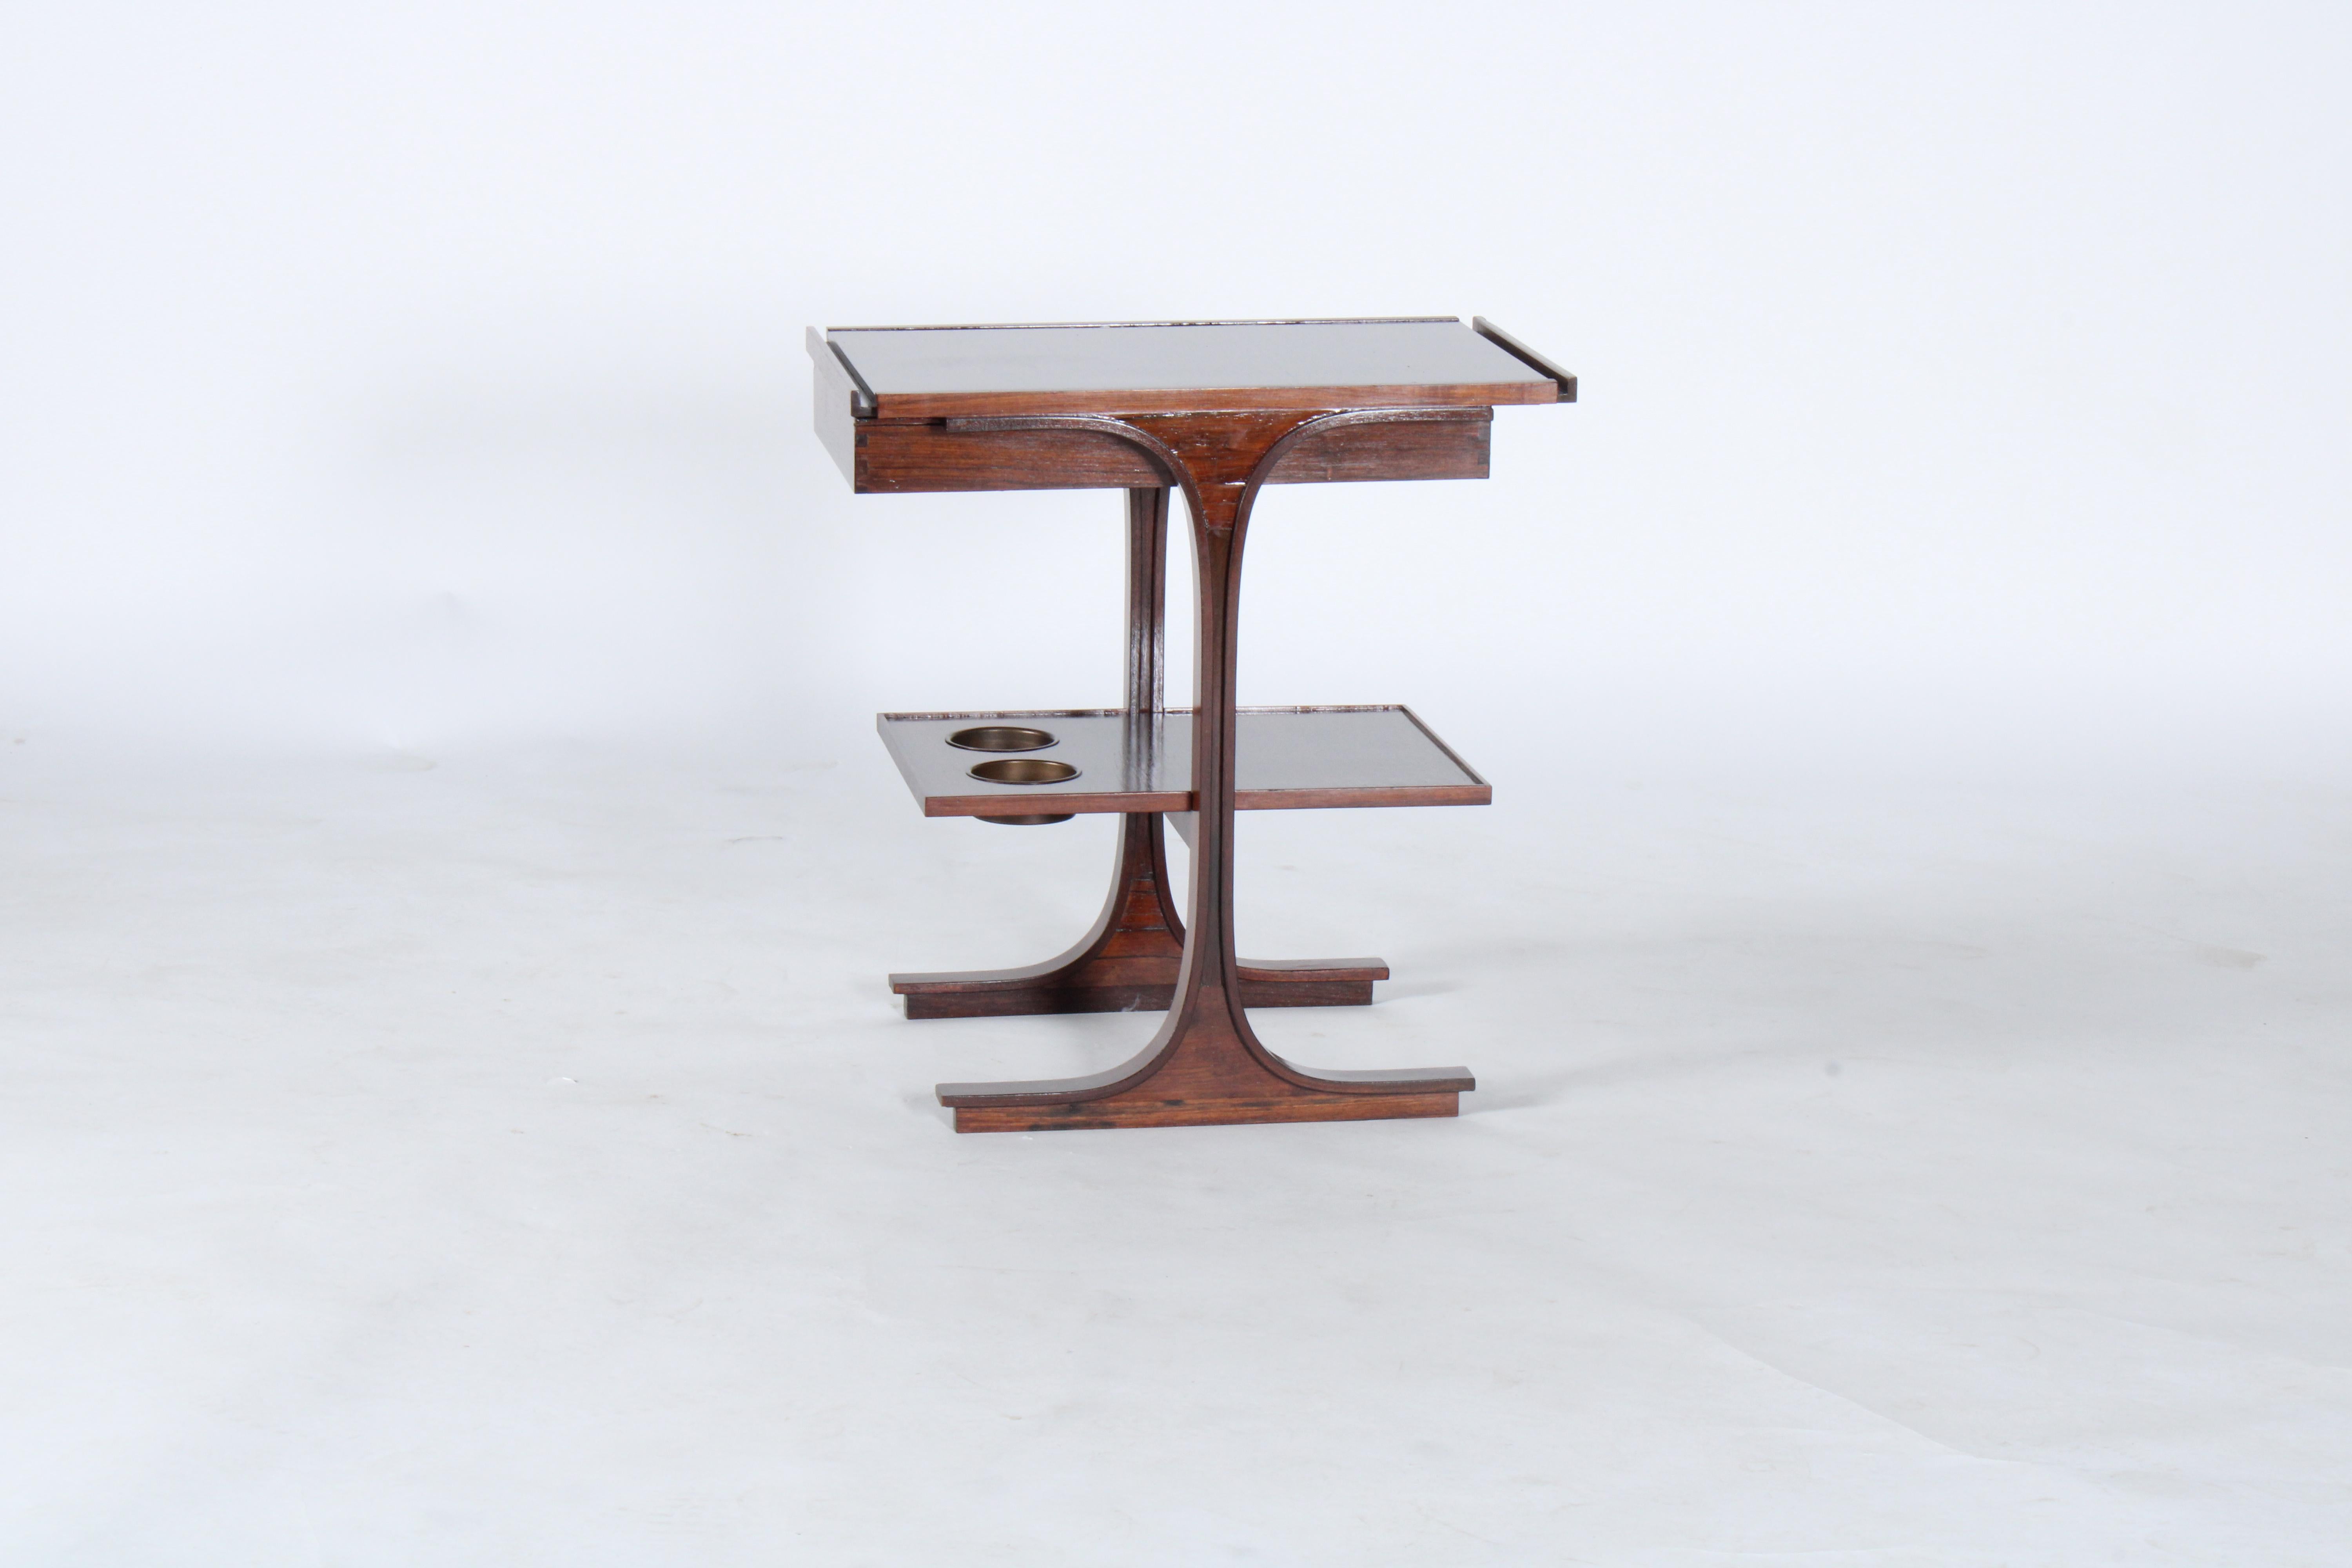 A beautiful, stylish and functional wine table by Gianfranco Frattini for Bernini. Designed and made circa 1963 this gorgeous piece with stunning grain pattern offers drawer storage and also inset brass bottle holders for your wine bottles and